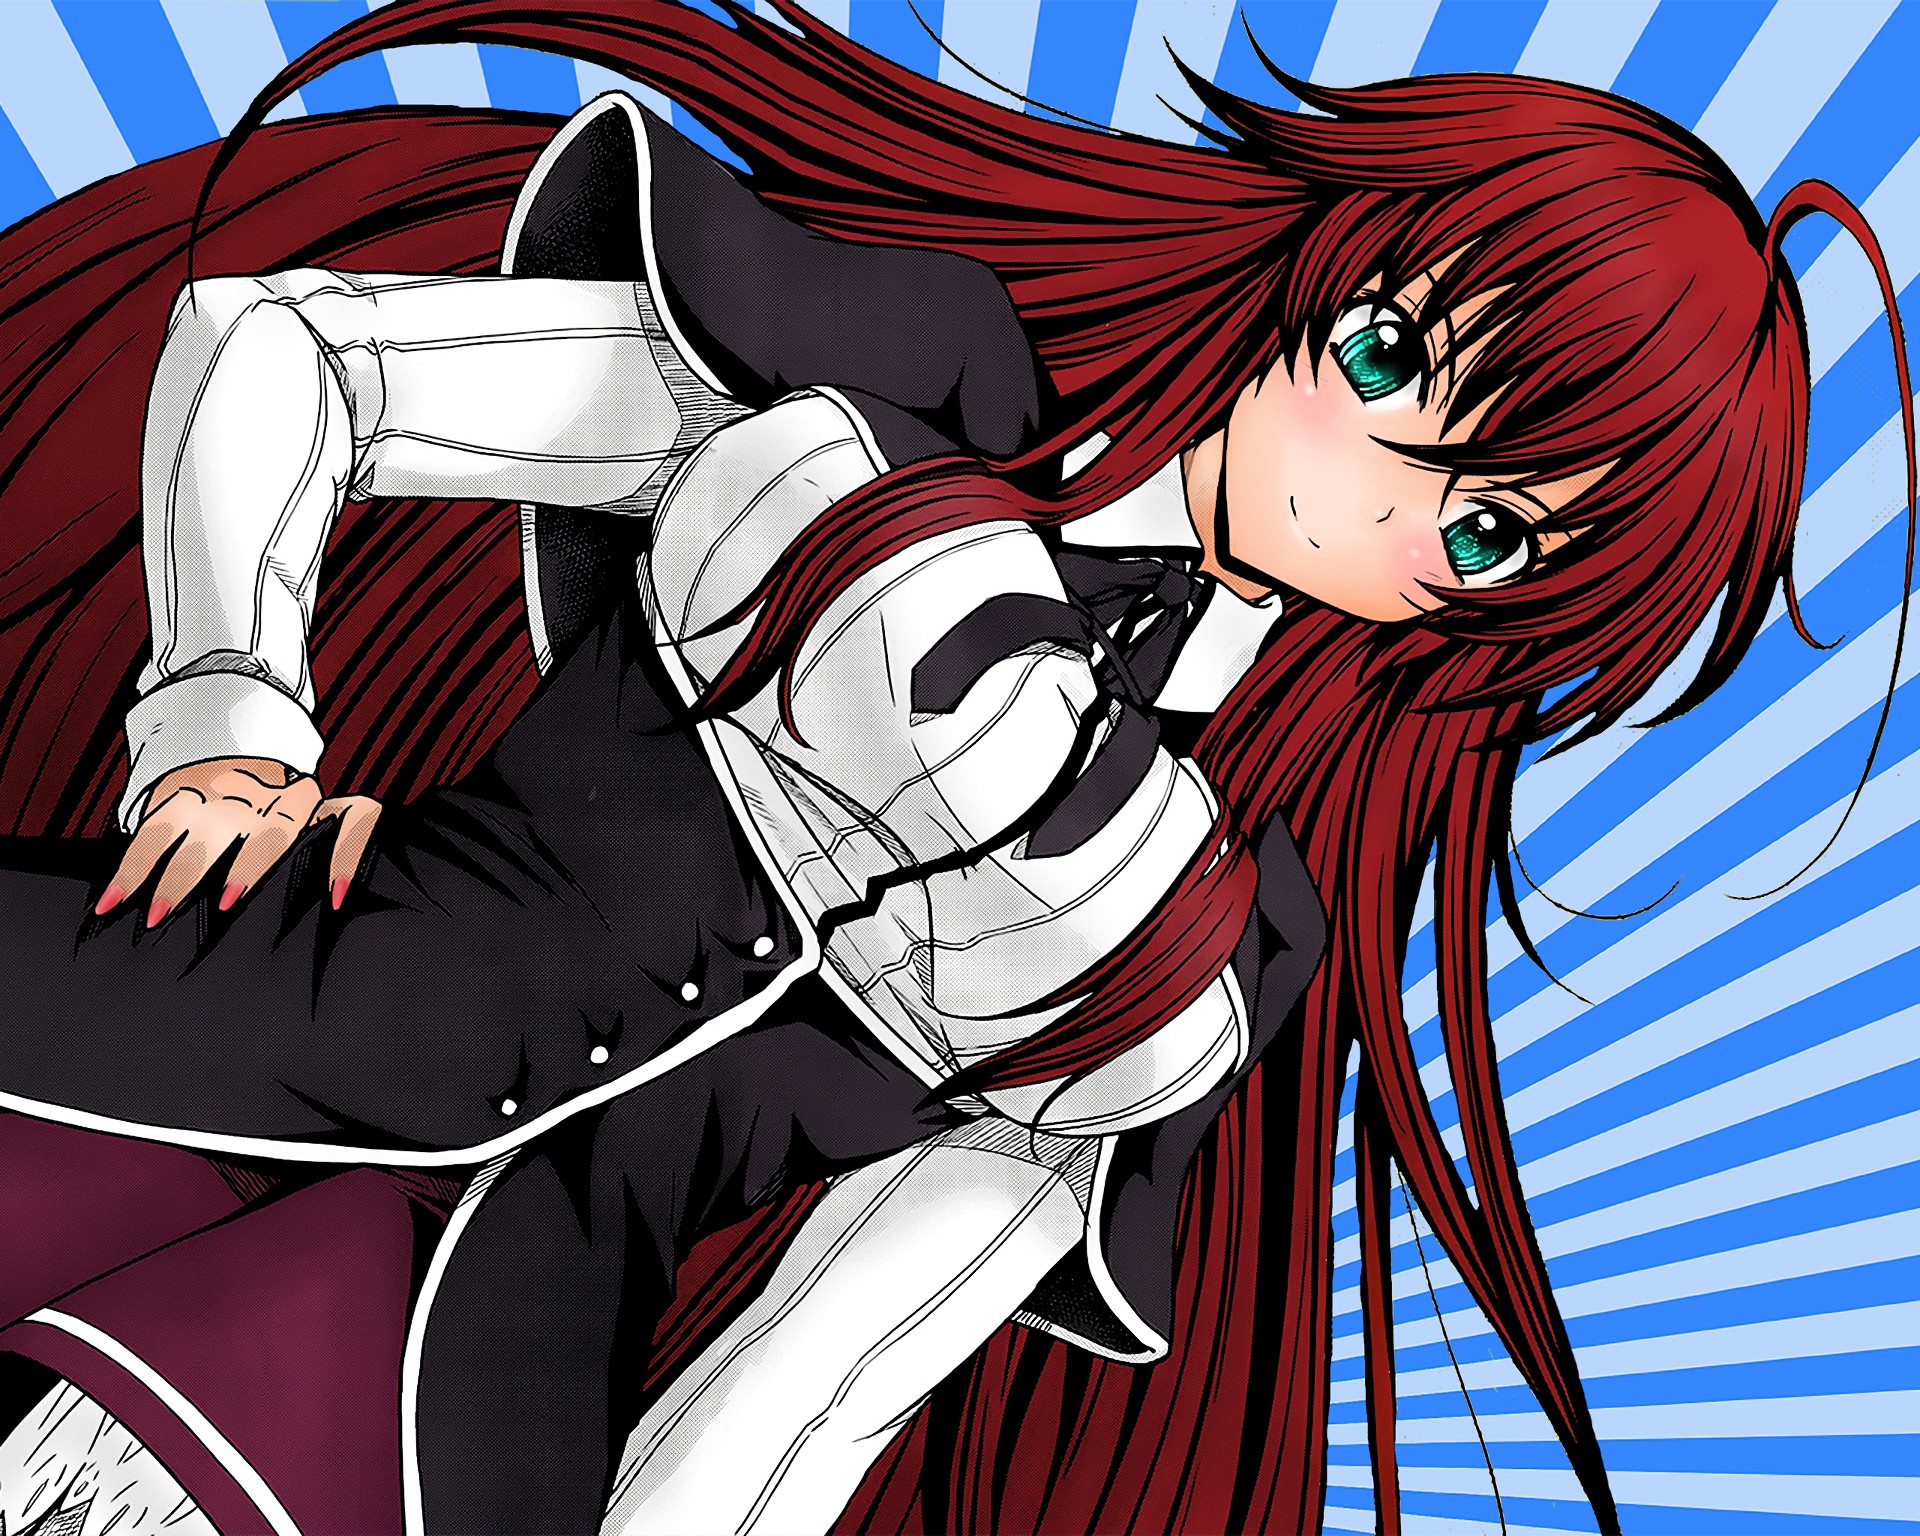 5. Rias Gremory from High School DxD - wide 3